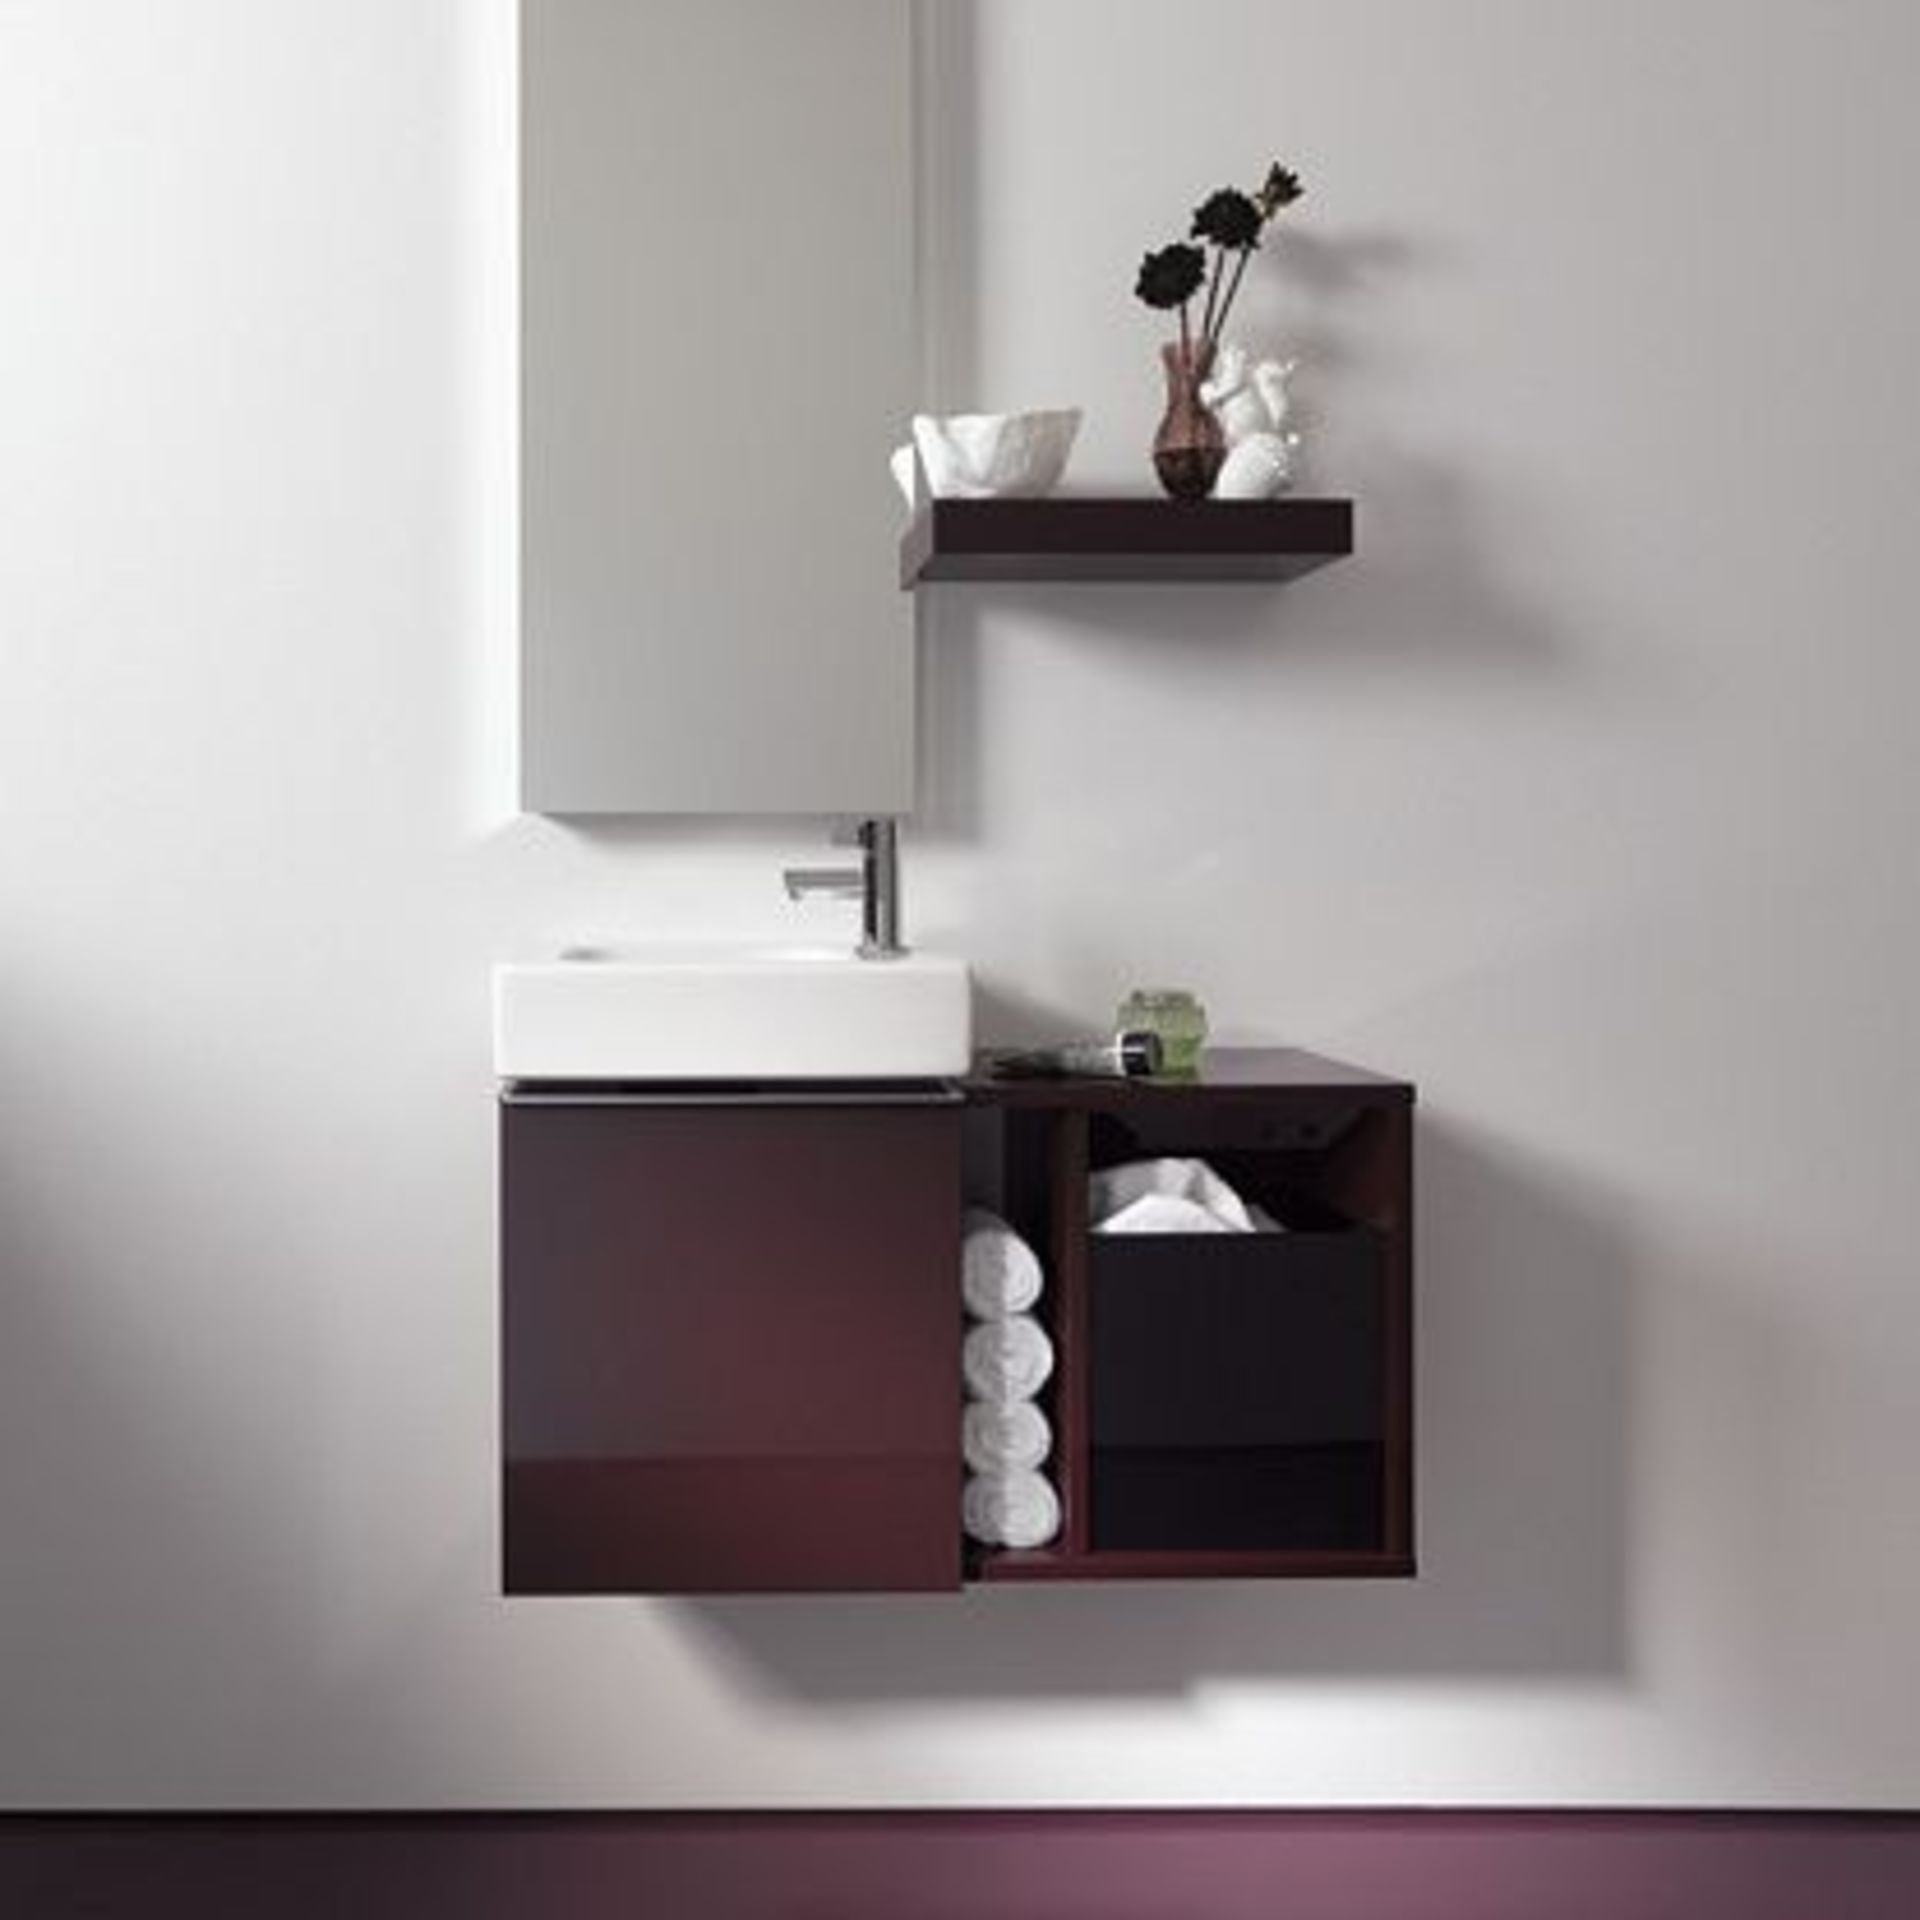 NEW (F104) Keramag iCon 370mm Cloakroom Burgendy Vanity unit. RRP £399.99. COMES COMPLETE WITH...